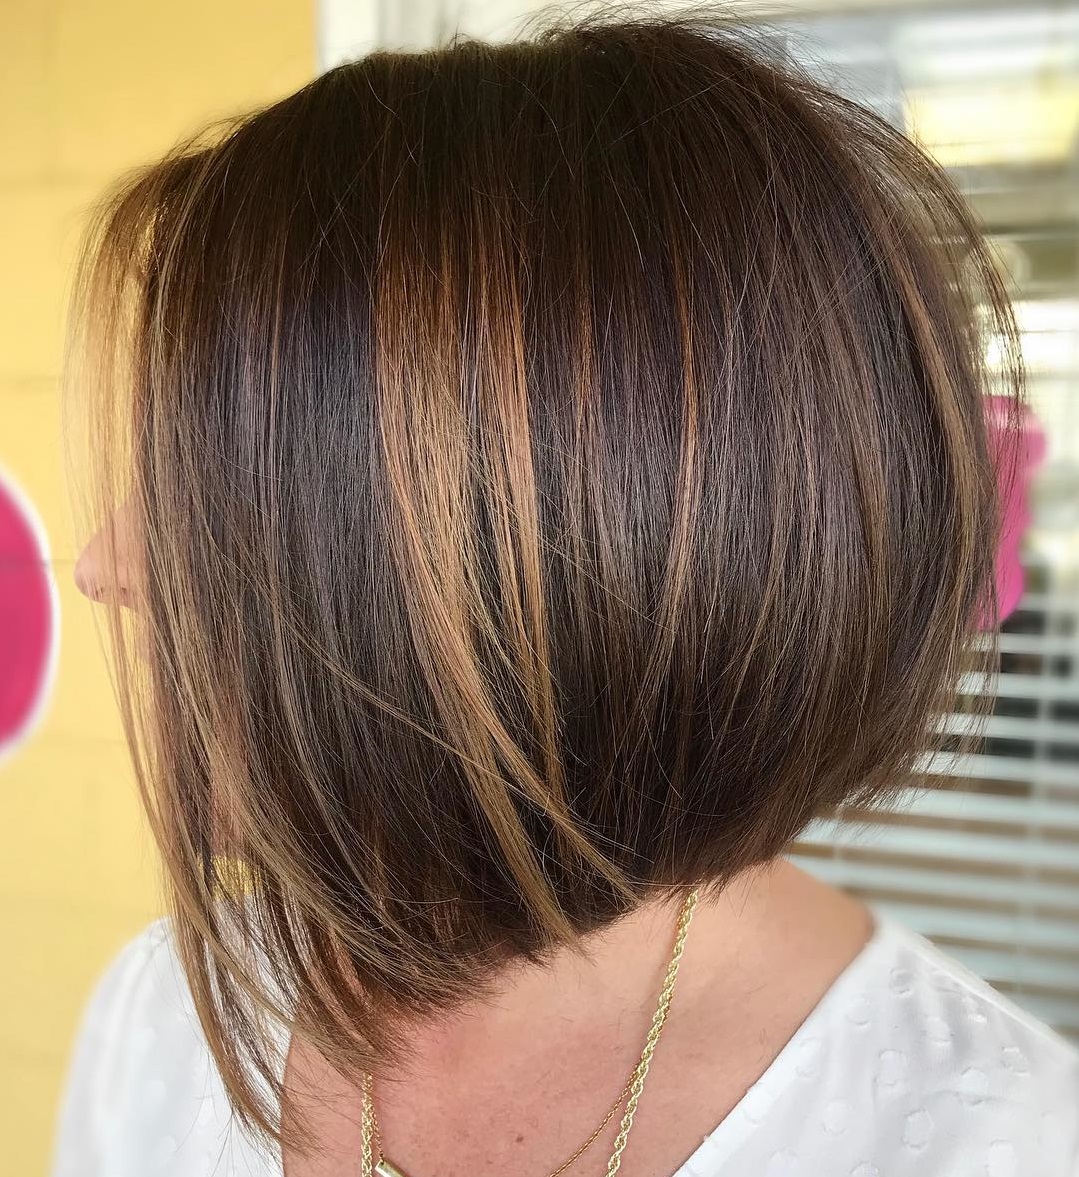 Highlighted Hair for Brunettes | LoveHairStyles.com